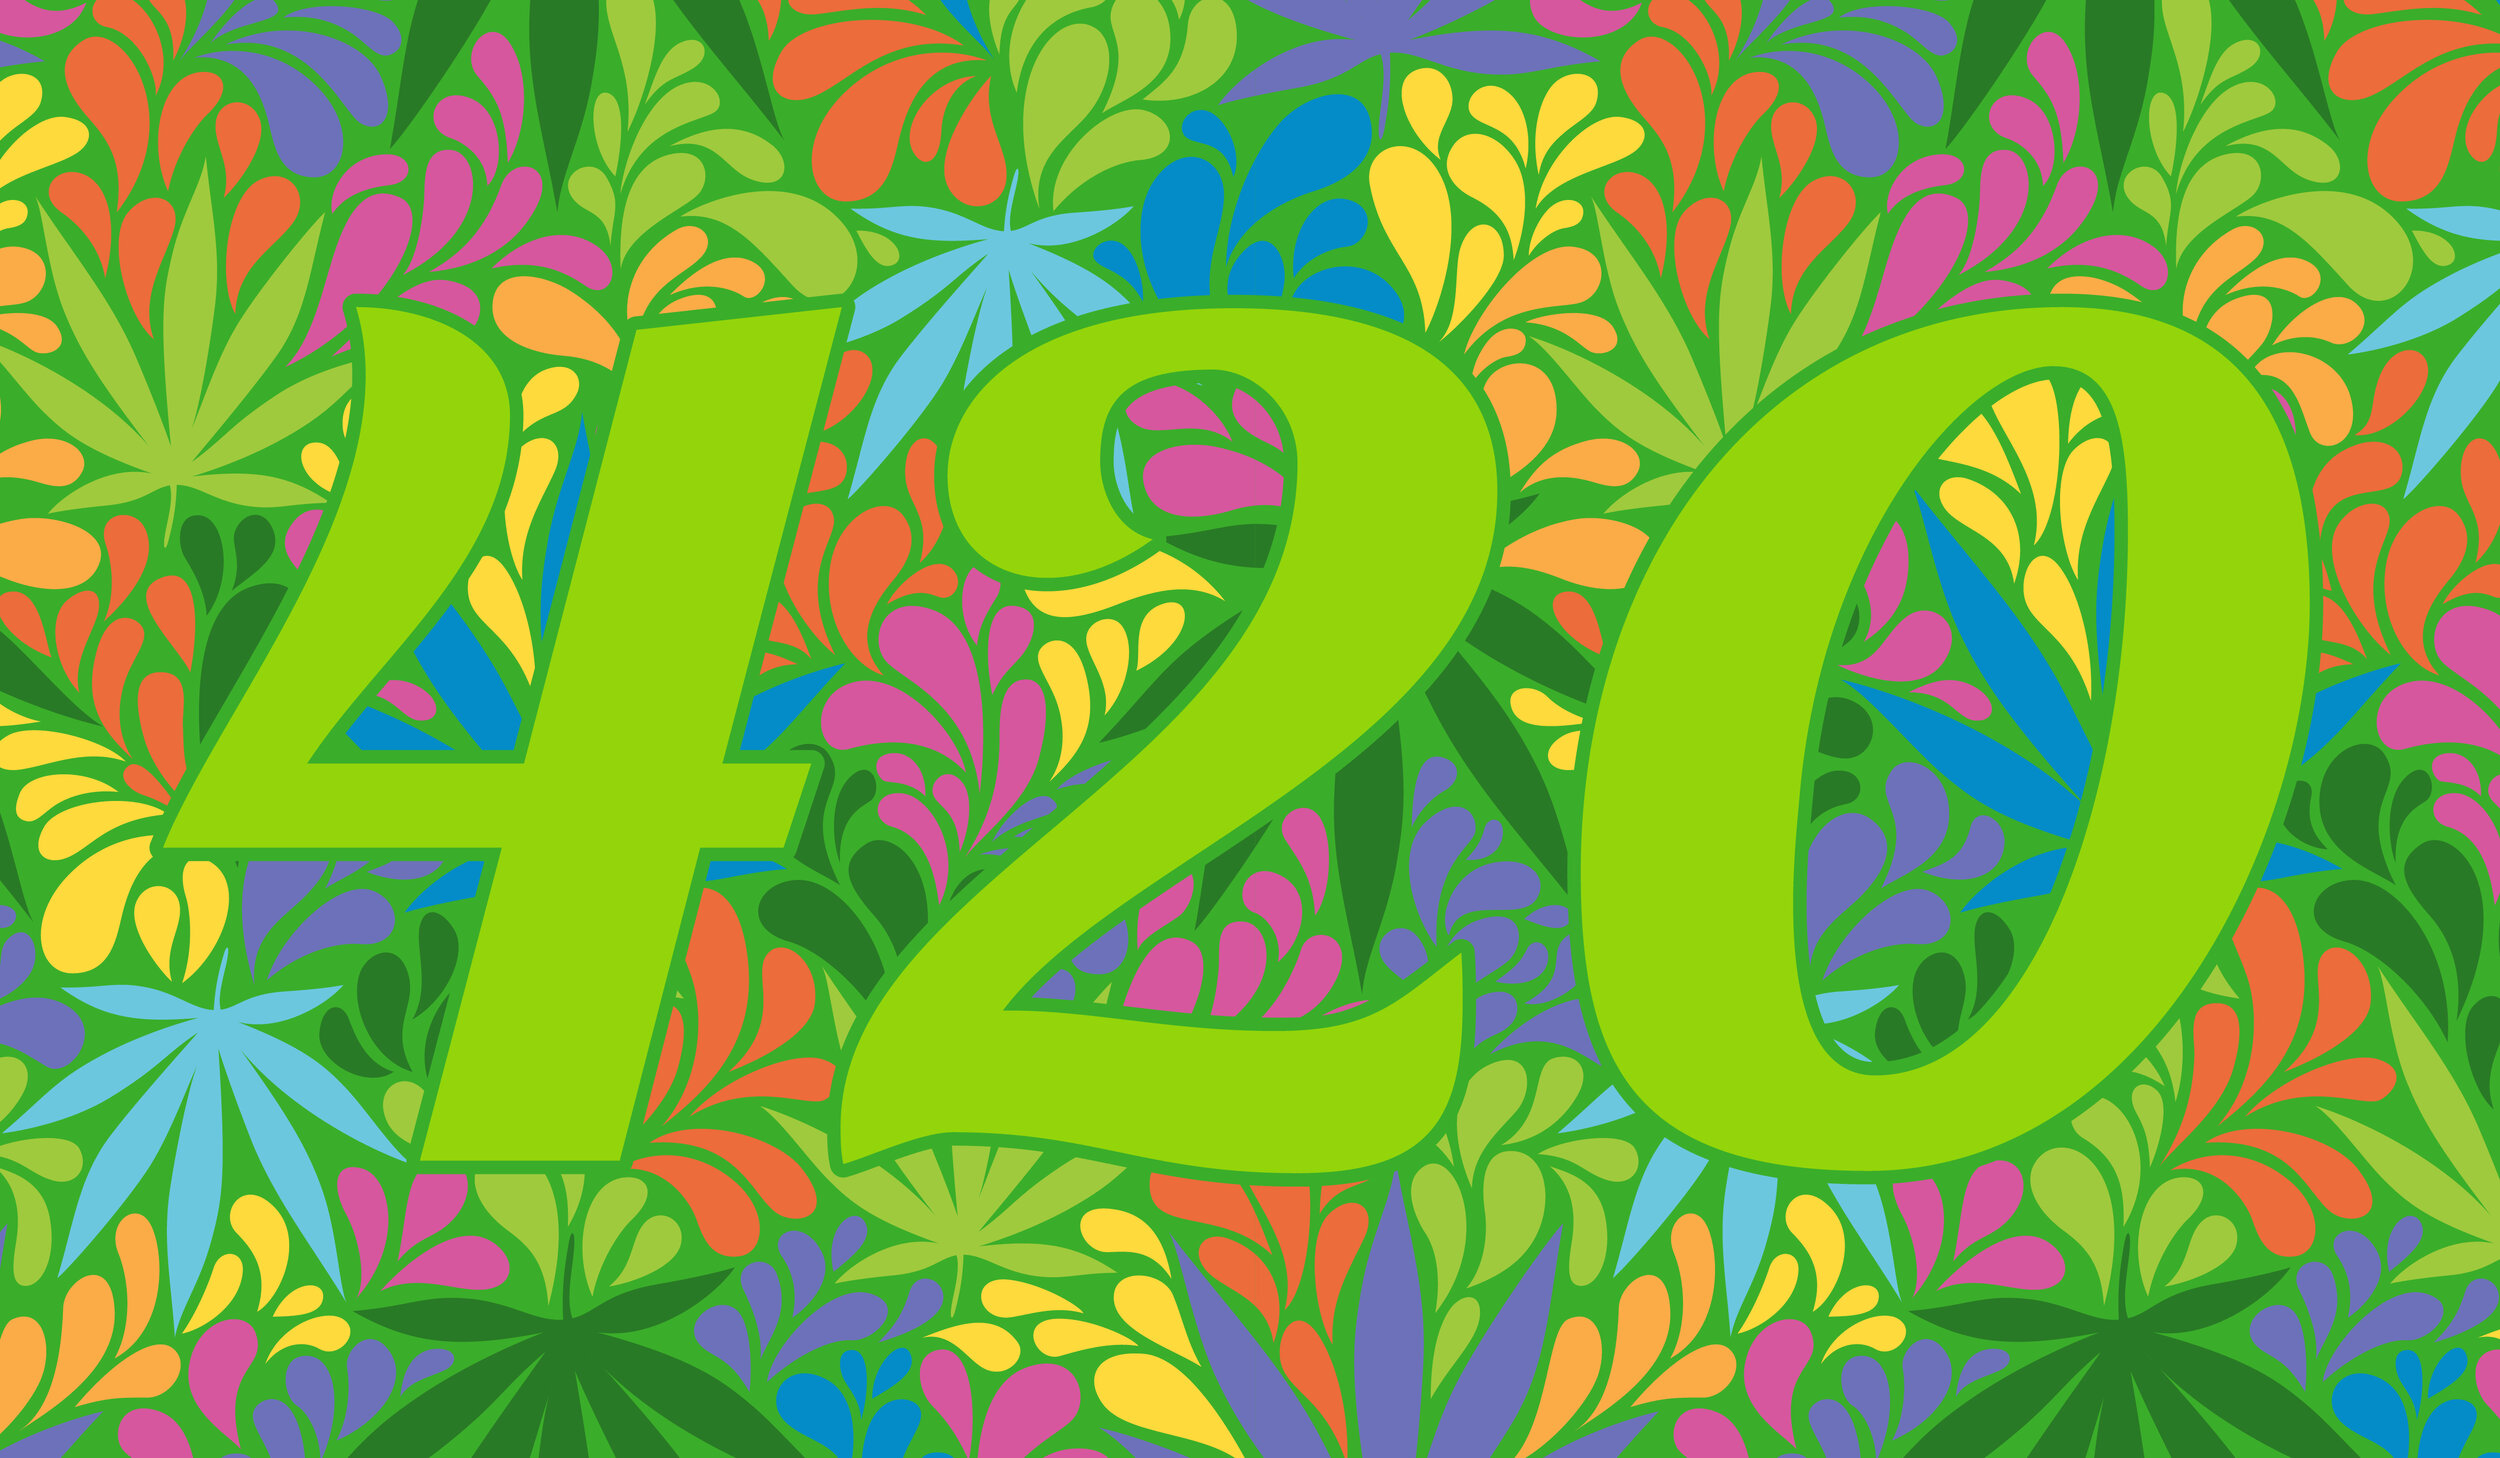 420 Events in MD, Virginia, and D.C. (2021)